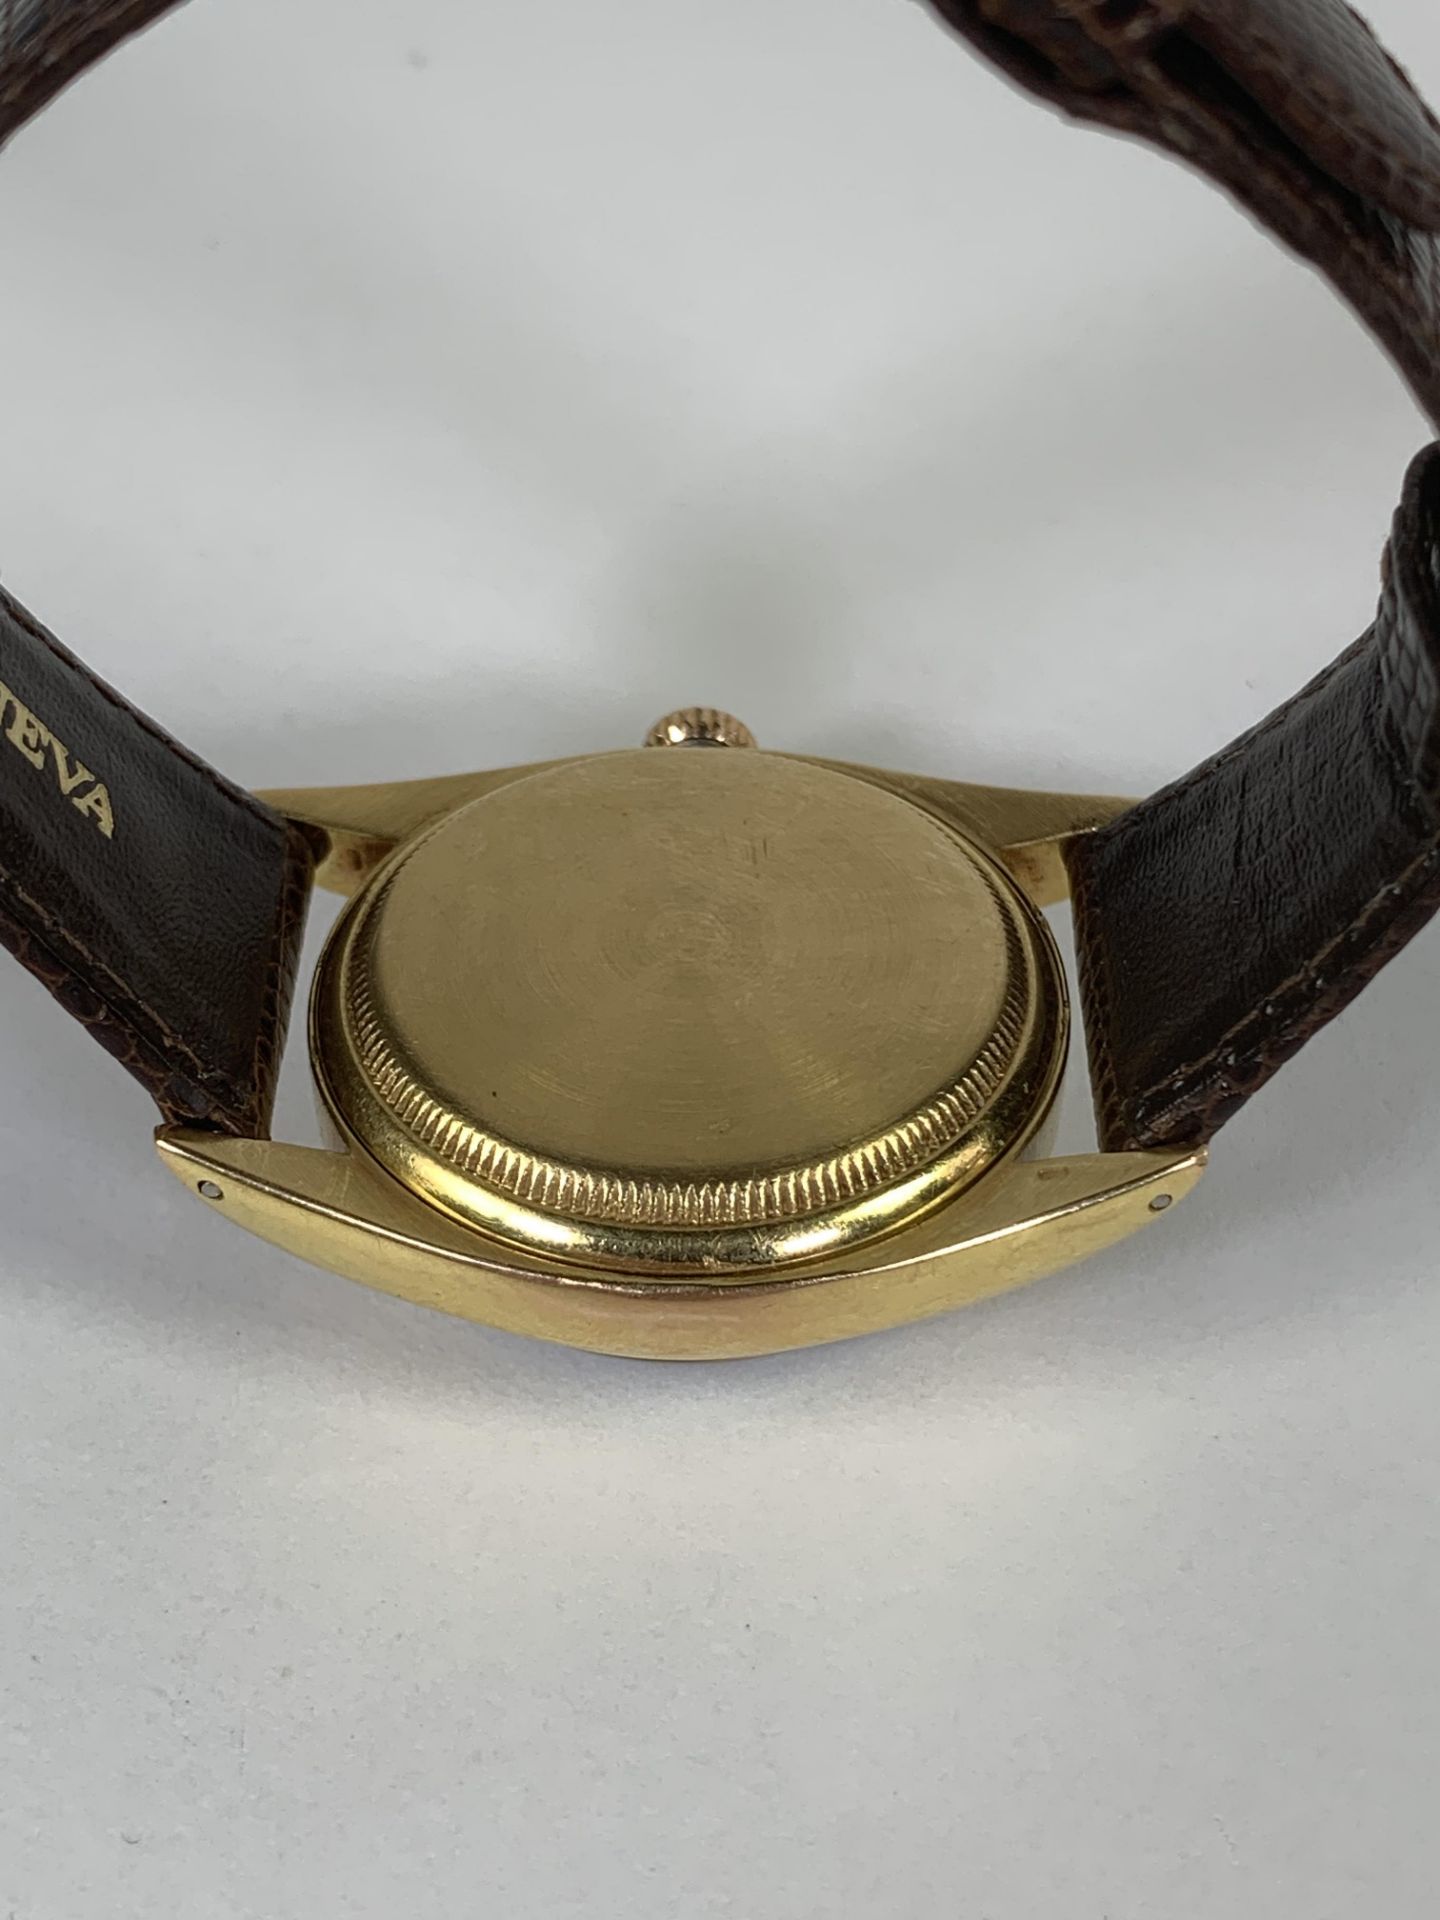 Extremely rare 1950's men's Rolex Oyster Perpetual ref 6029, crown 1951 - Image 12 of 16